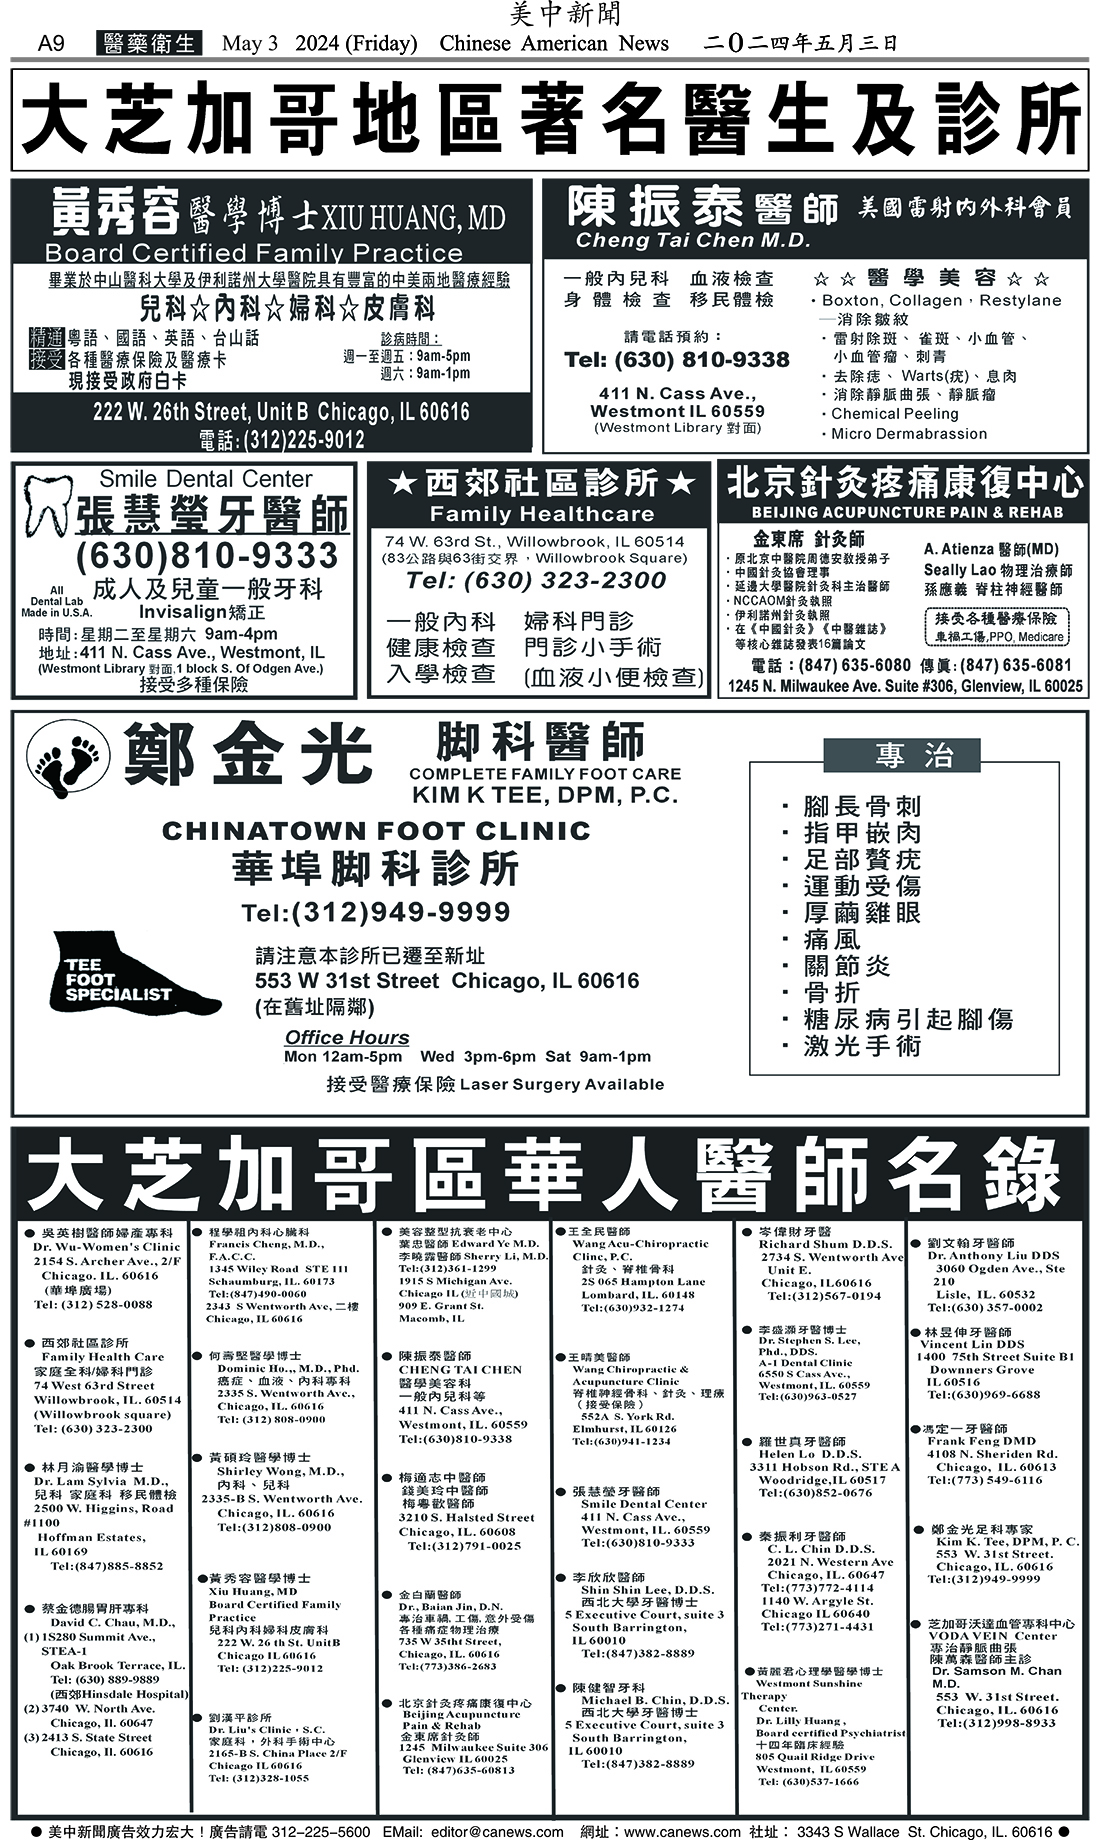 Chinese American News Page A09